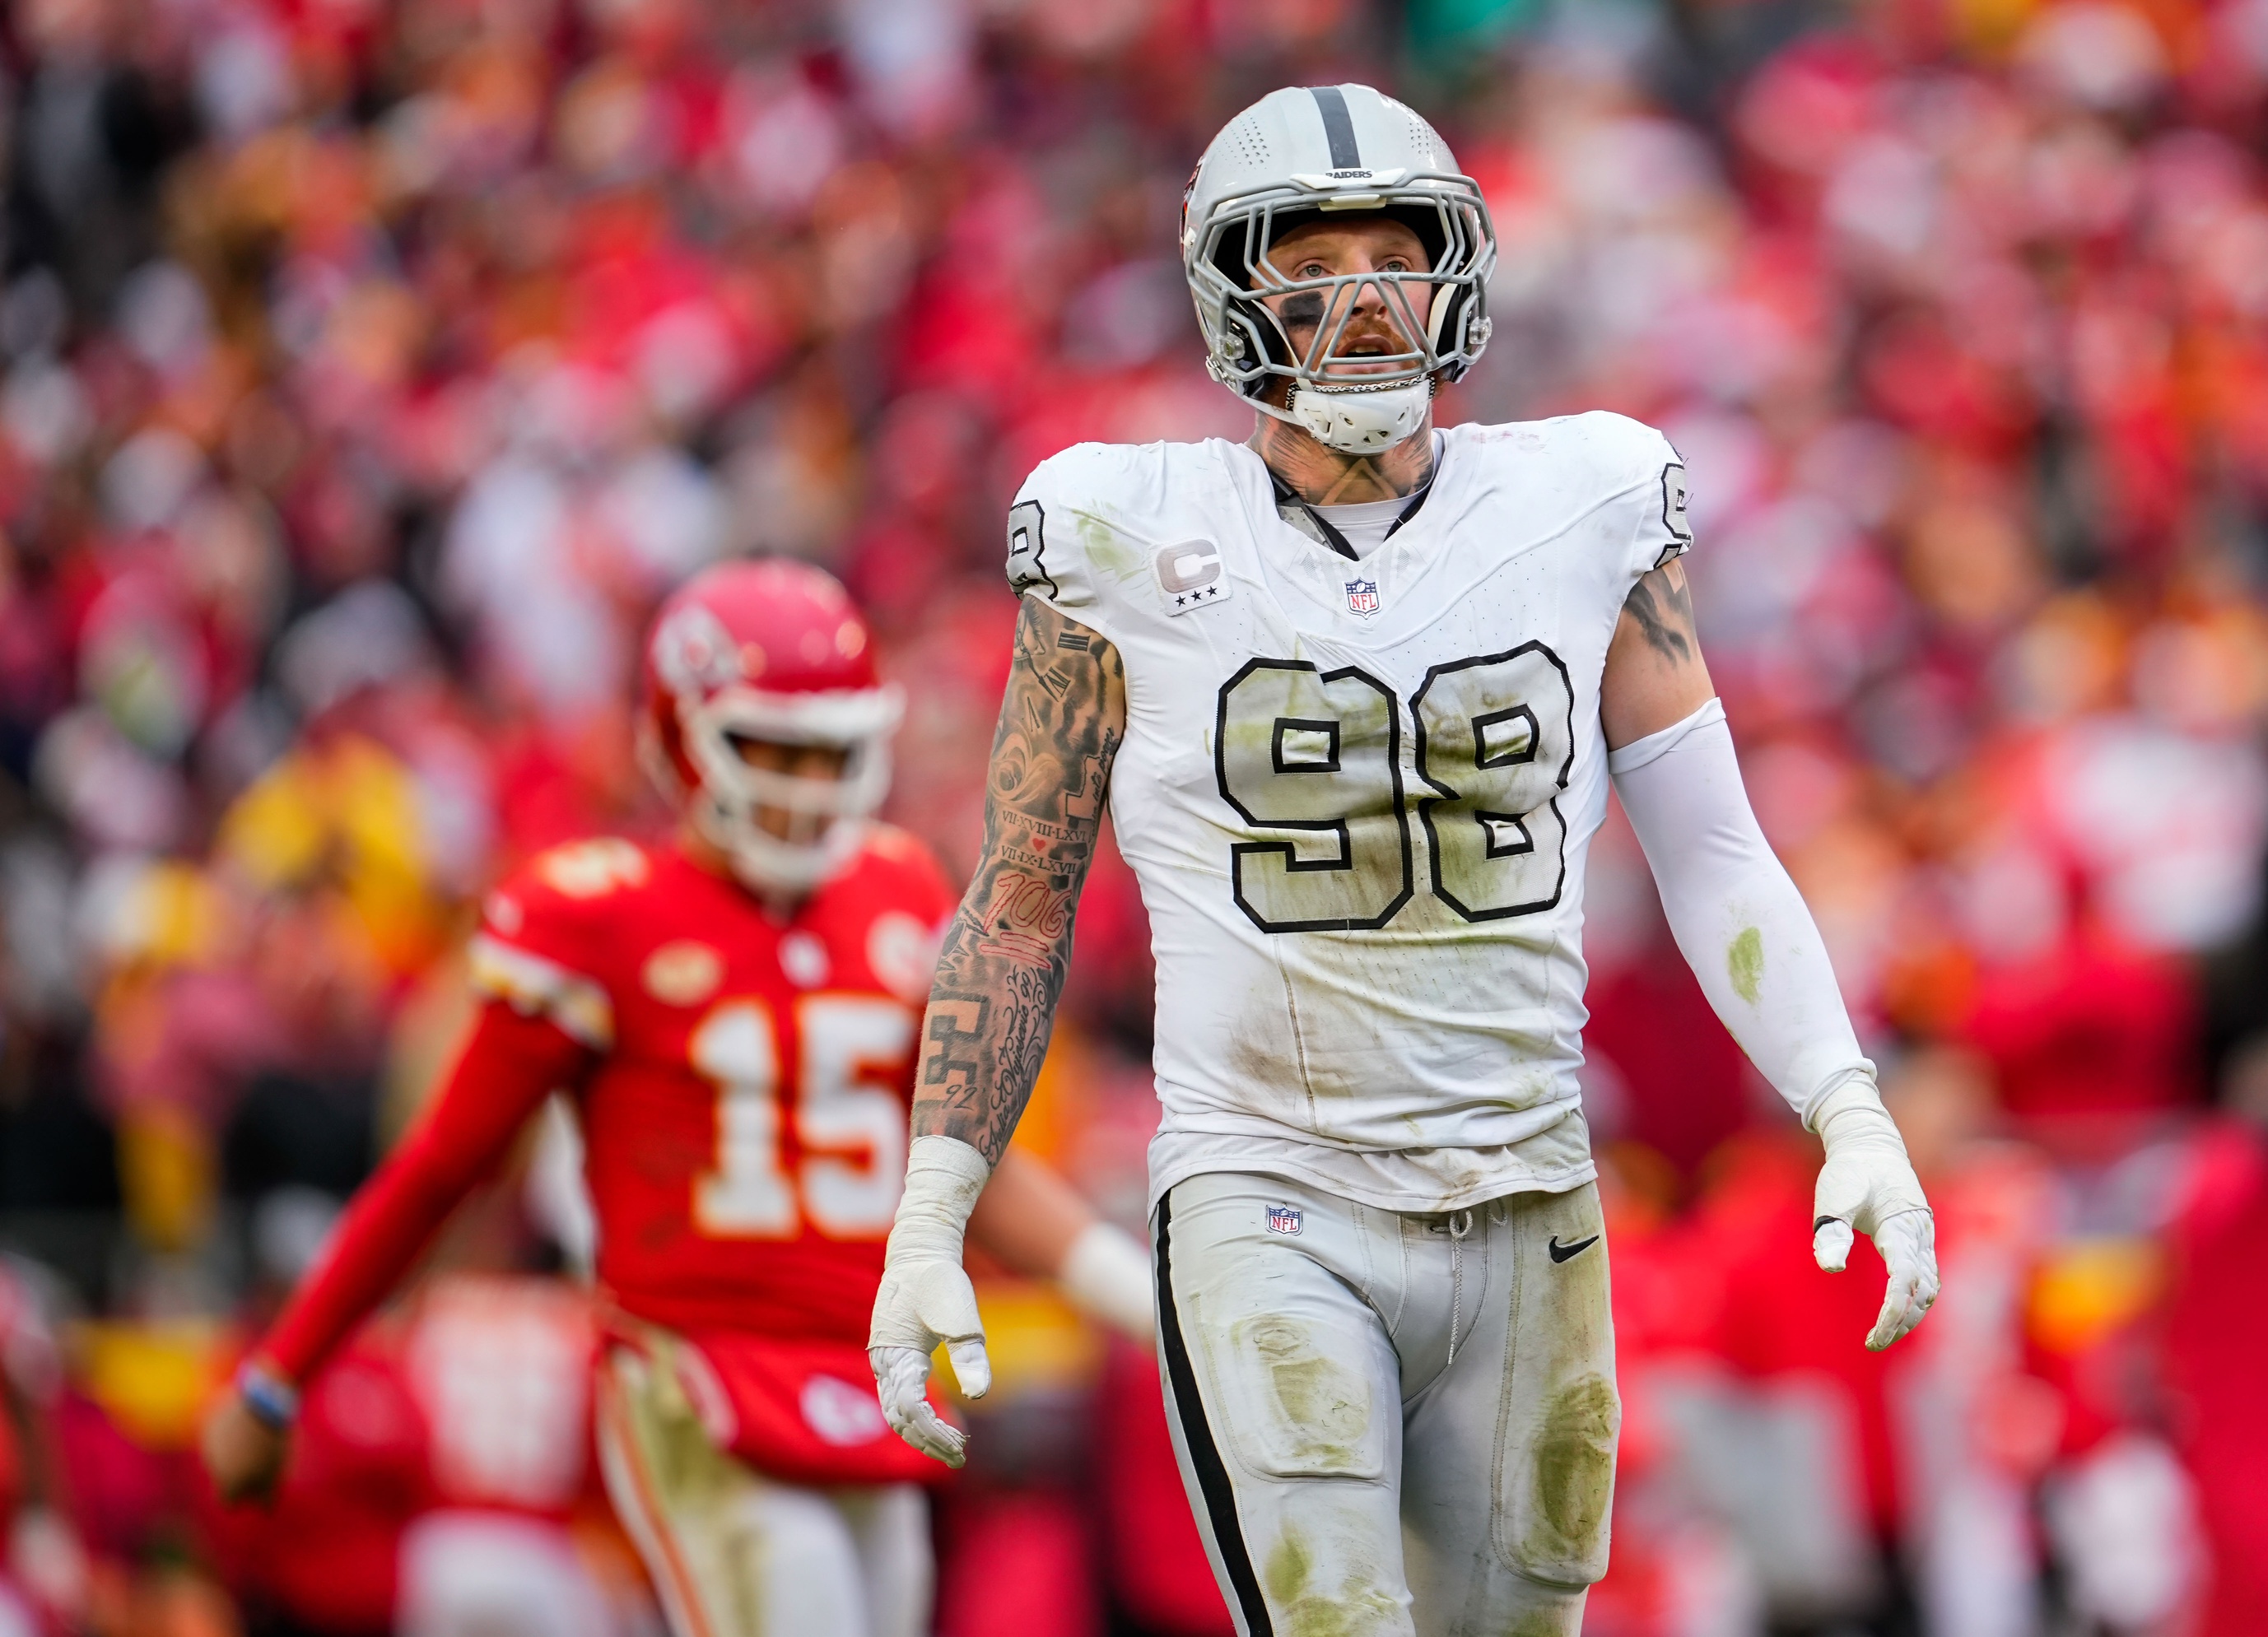 Former NFL offensive guard Brian Baldinger compared Las Vegas Raiders defensive end Maxx Crosby to the other top NFL edge rushers when he joined Crosby's podcast.